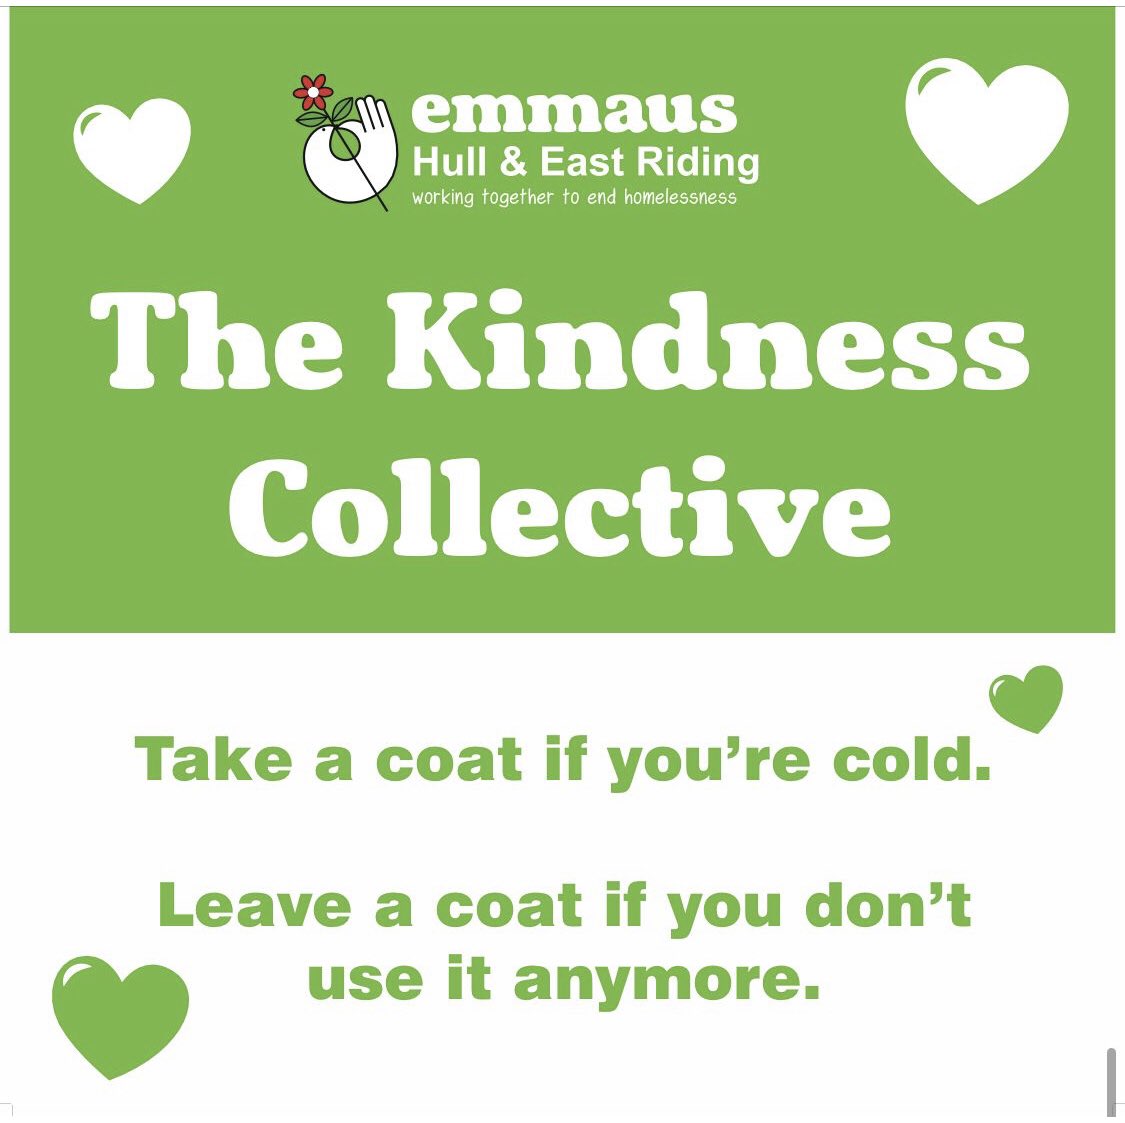 Still running in our Emporium on Whitefriargate 💚 does what it says on the tin 💚 #KindnessMatters #KindnessGiveaway #emmaus